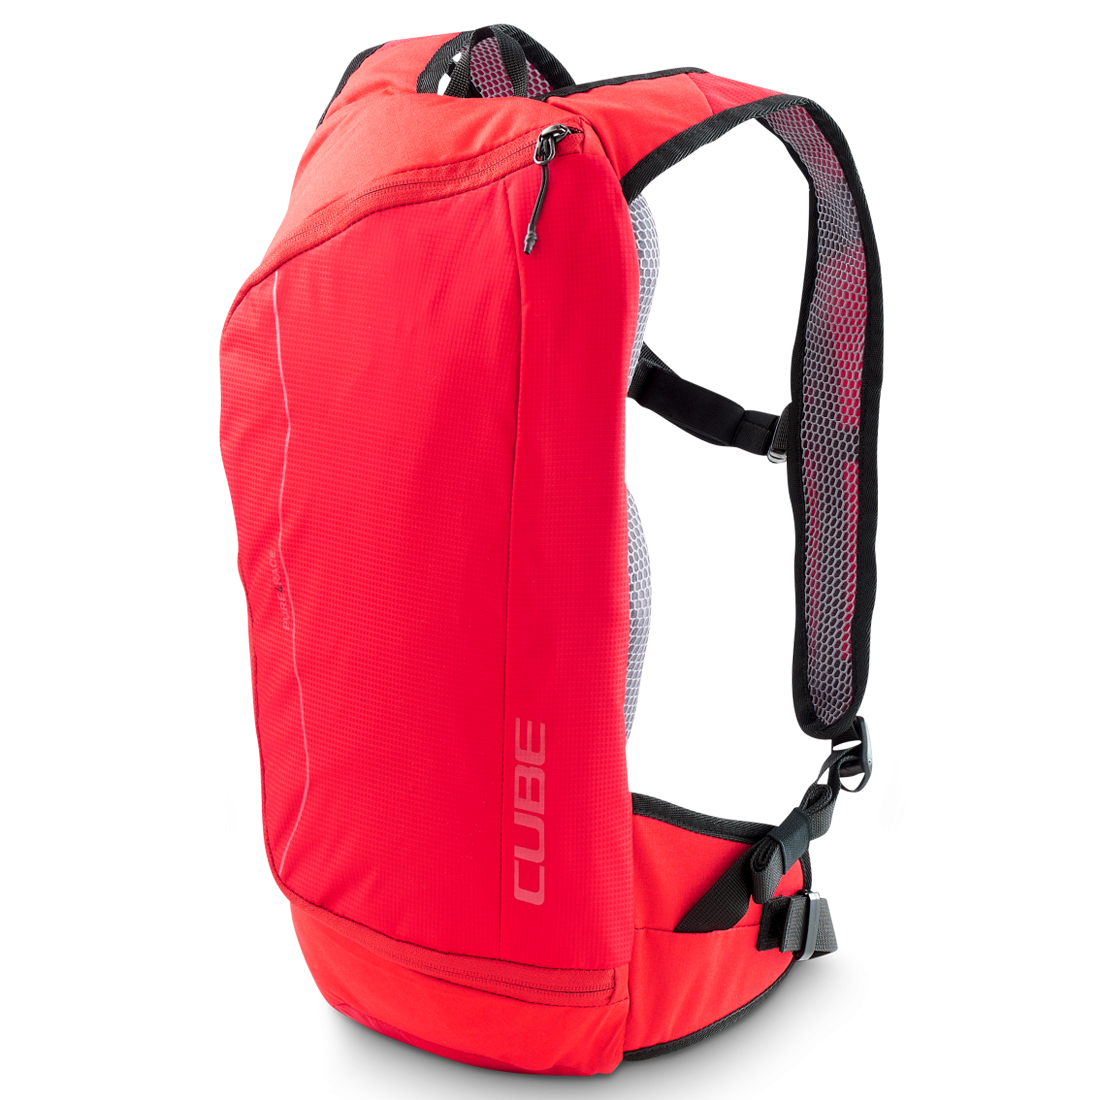 Productfoto van CUBE Backpack PURE4race - red